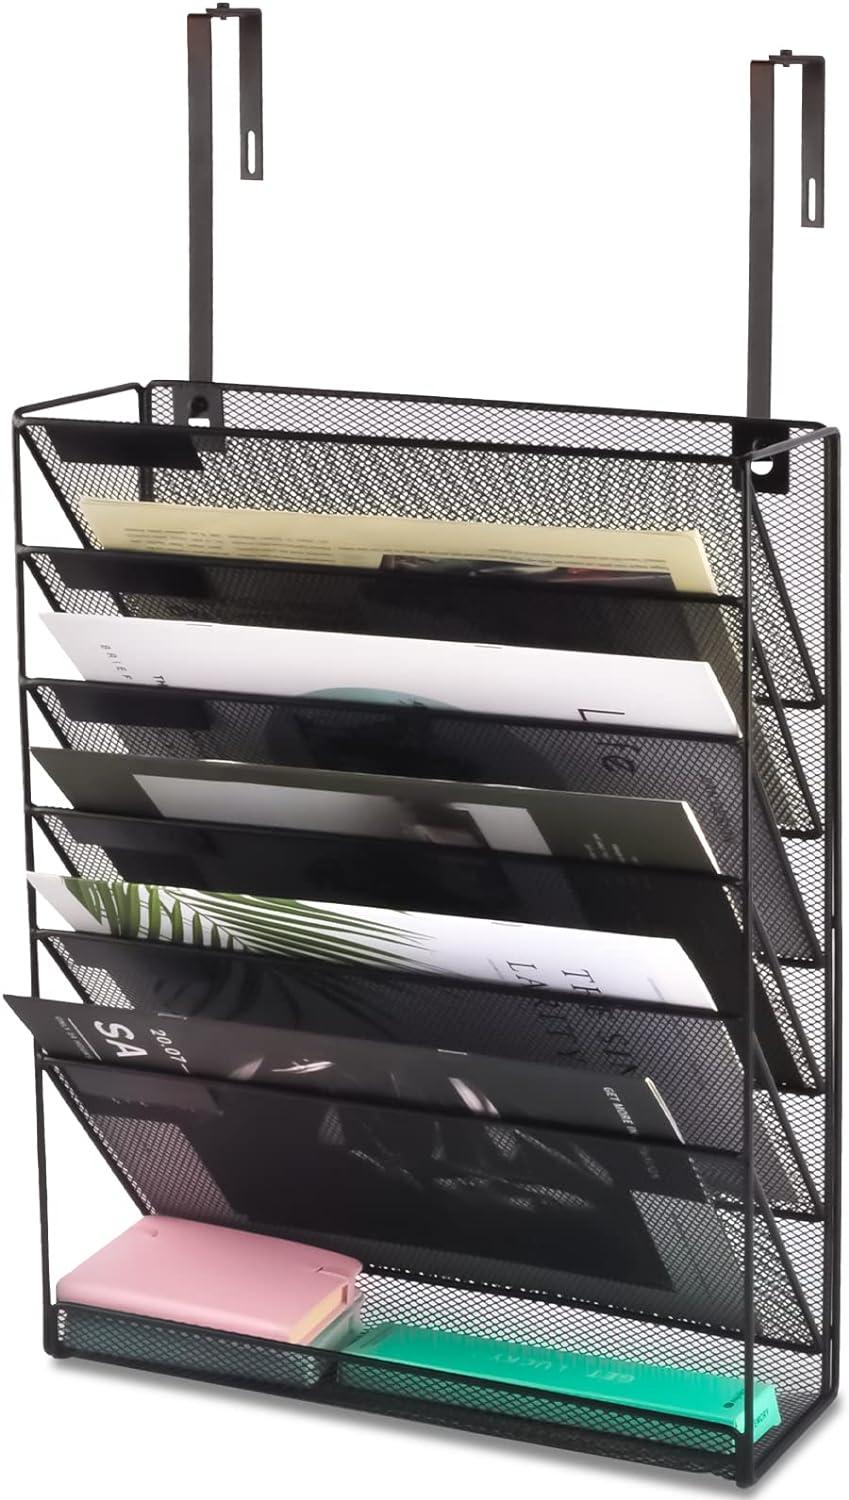 Gdindinfan Cubicle Hanging File Holder Organizer 6 Tier Wall Mount Vertical Document Letter